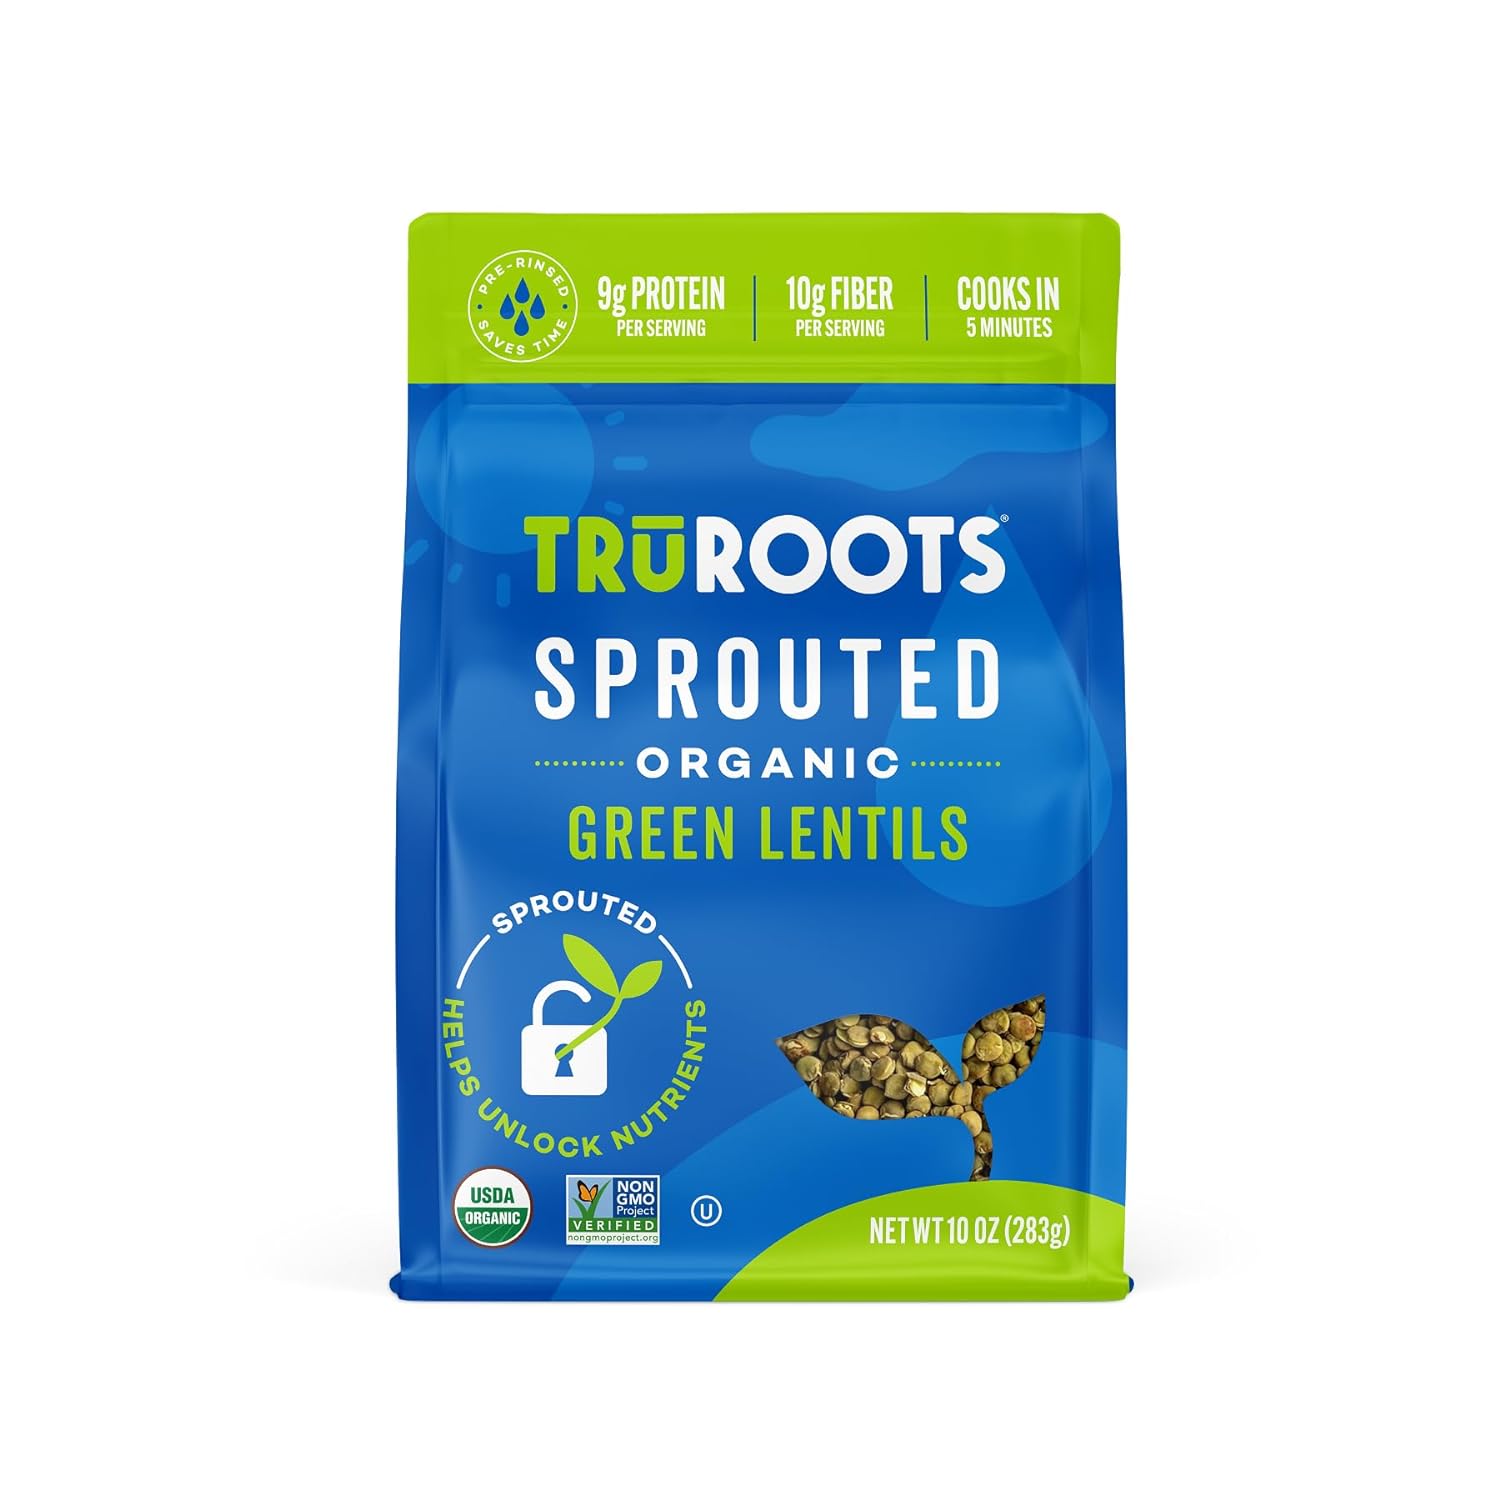 TruRoots Organic Sprouted Green Lentils, 10 Ounces, Certified USDA Organic, Non-GMO Project Verified